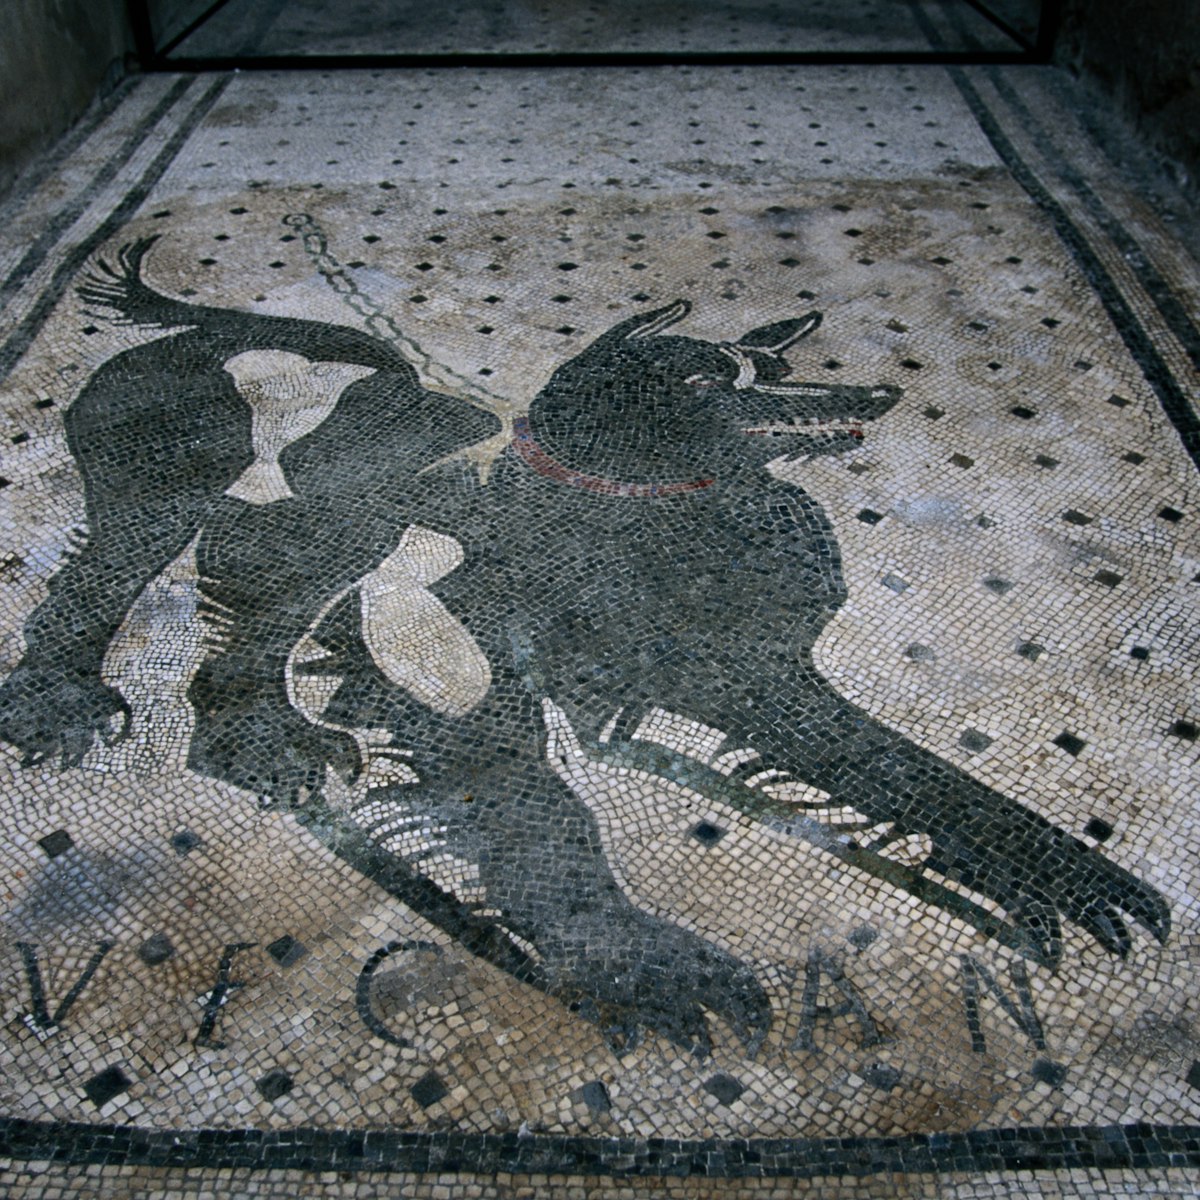 Dog mosaic in the House of the Tragic Poet.